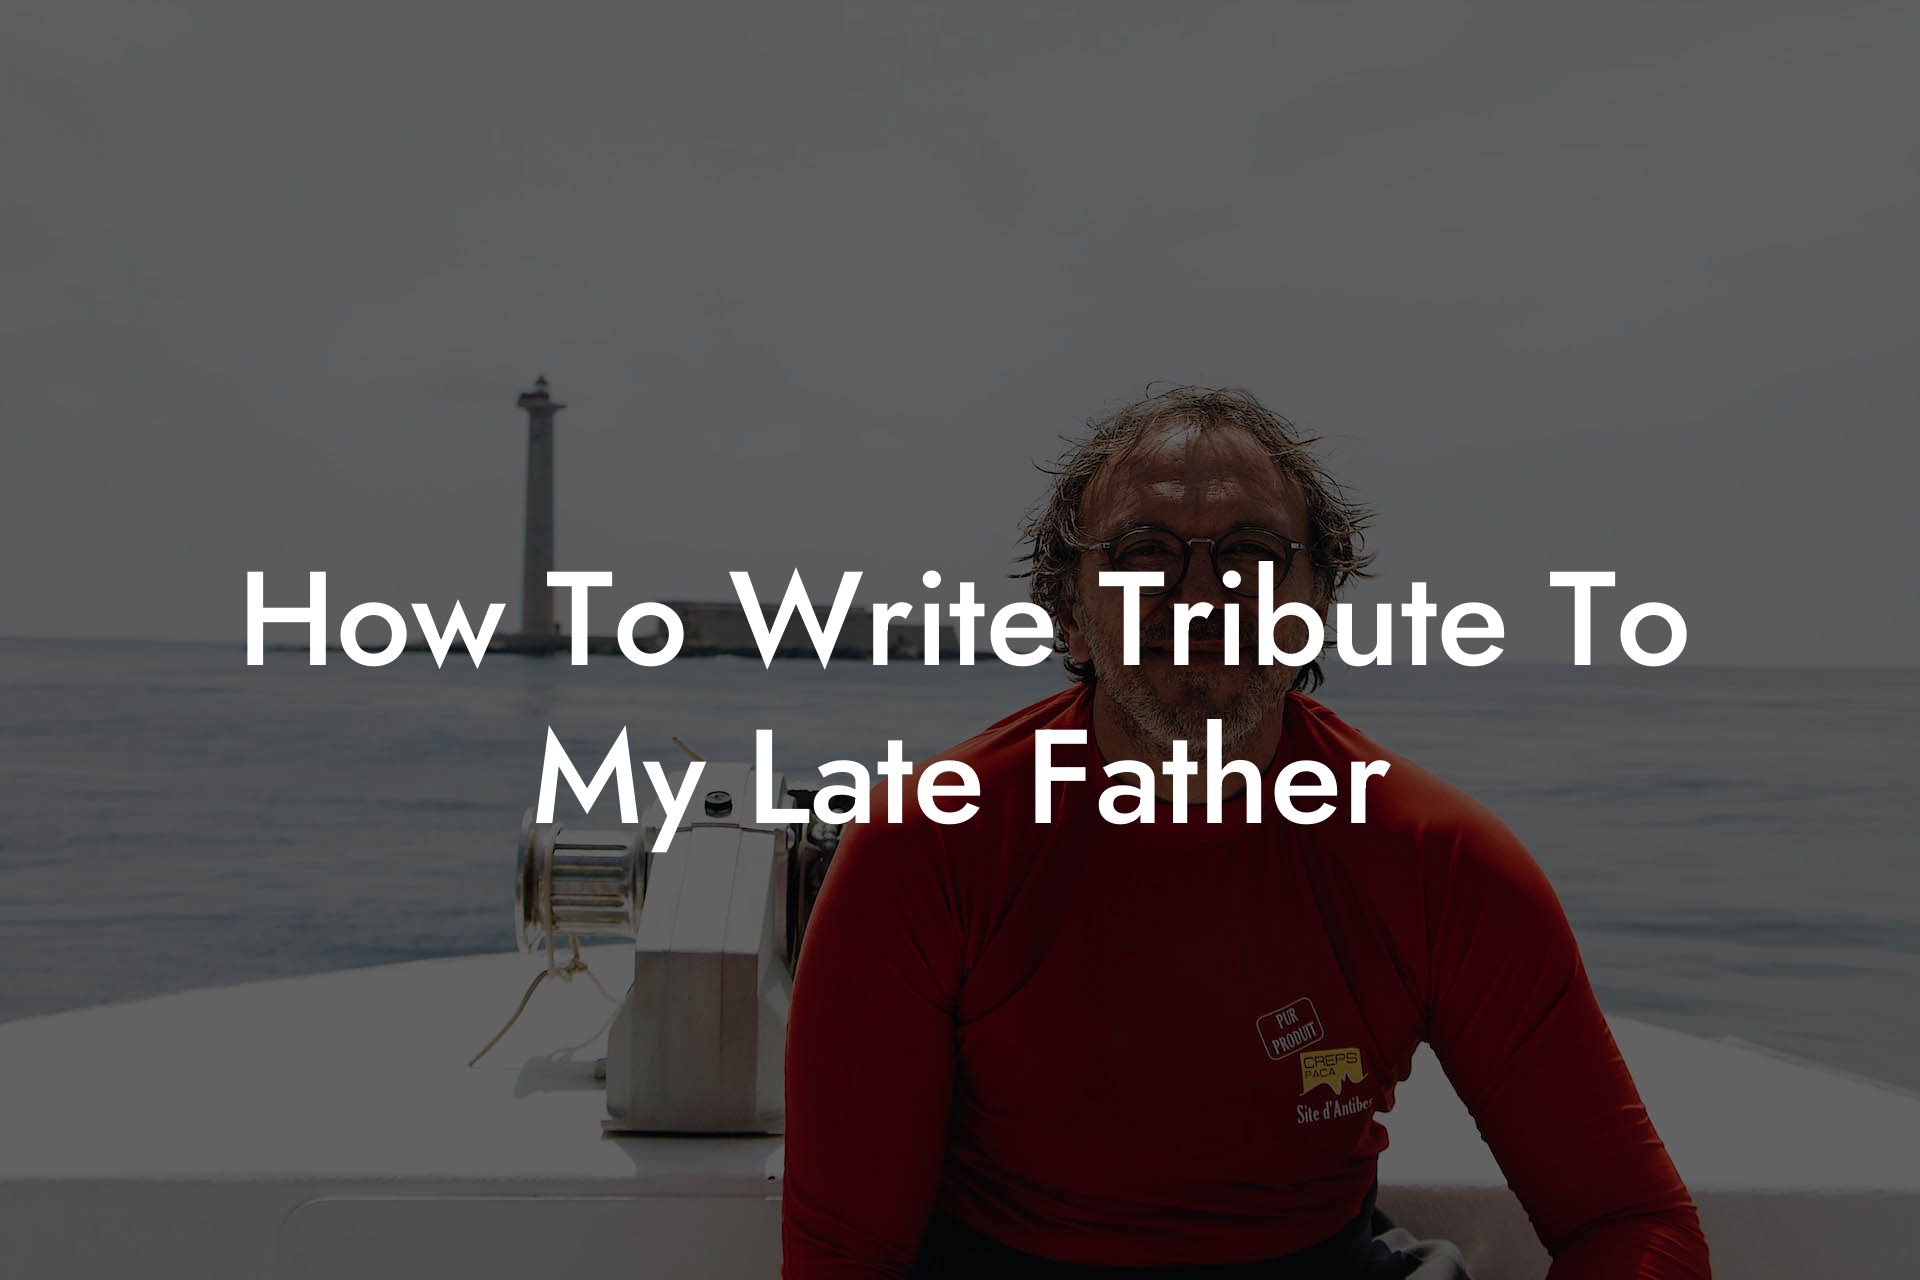 How To Write Tribute To My Late Father